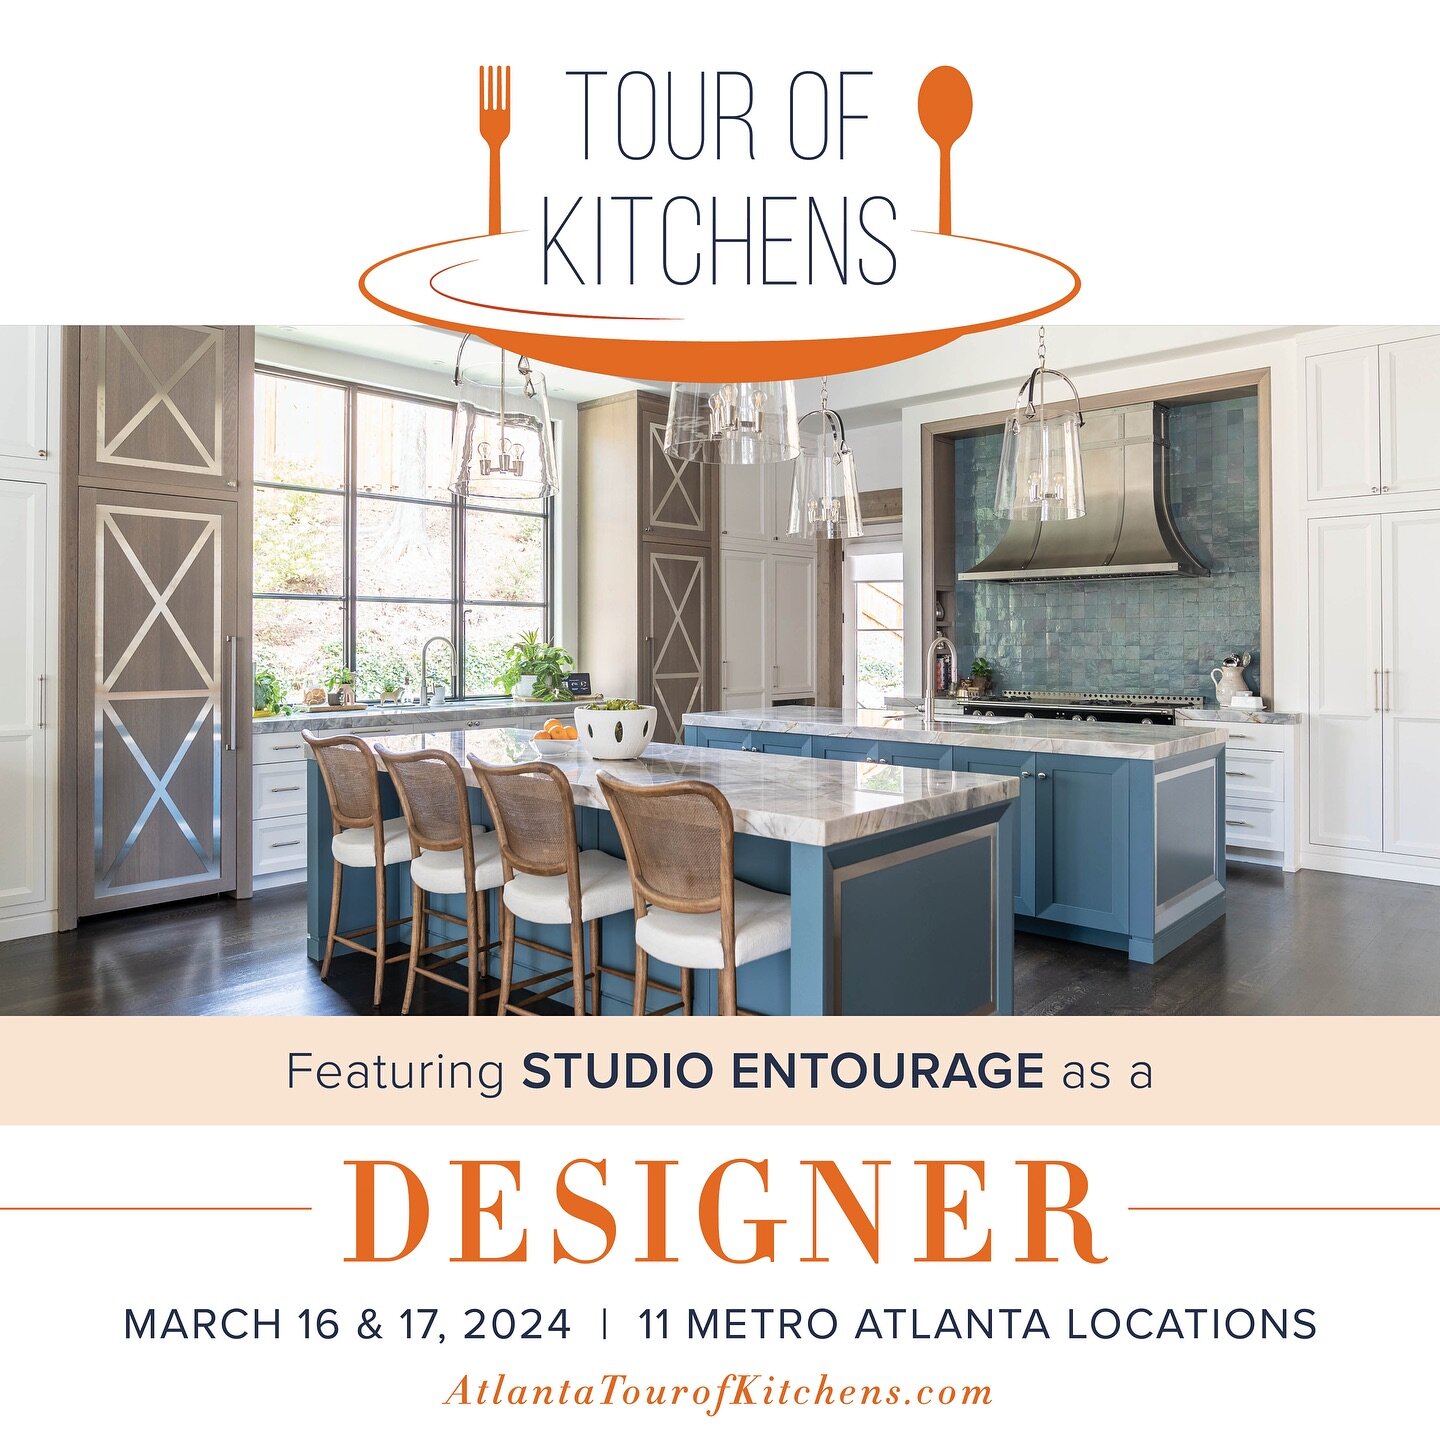 Come join us at this year&rsquo;s @atlantahomesmag Tour of Kitchens March 16th-March 17th 🩵
This is a great place to get inspiration for your own kitchen (and support two of @studioentourage&rsquo;s kitchens 😉)

Tickets on sale now at @atlantahomes